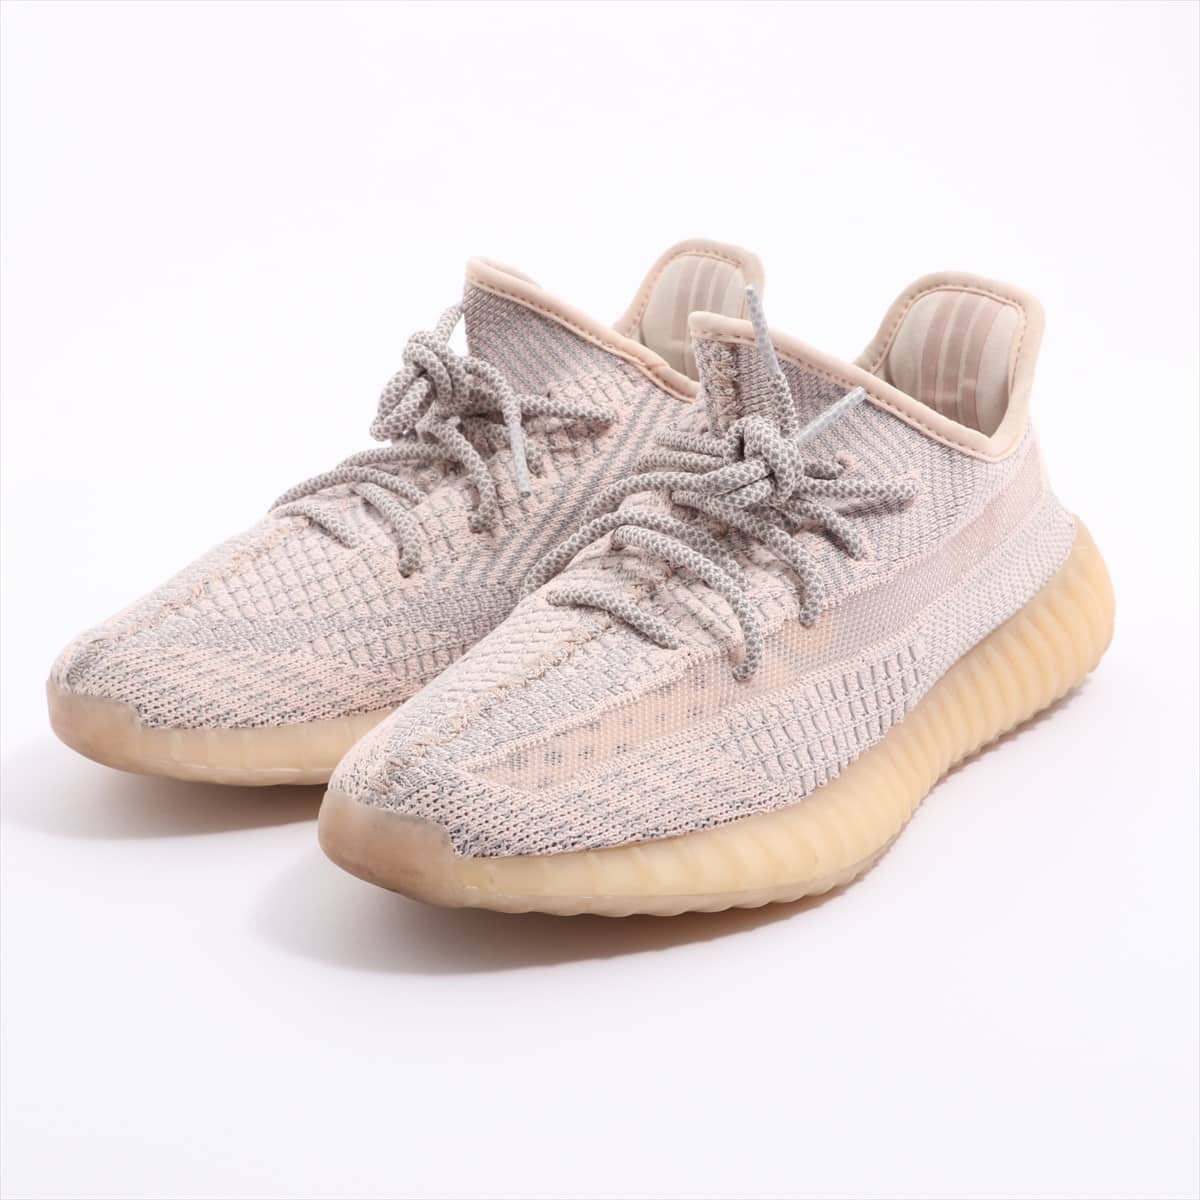 Adidas YEEZY BOOST 350 V2 Knit Sneakers 26.5cm Men's Pink